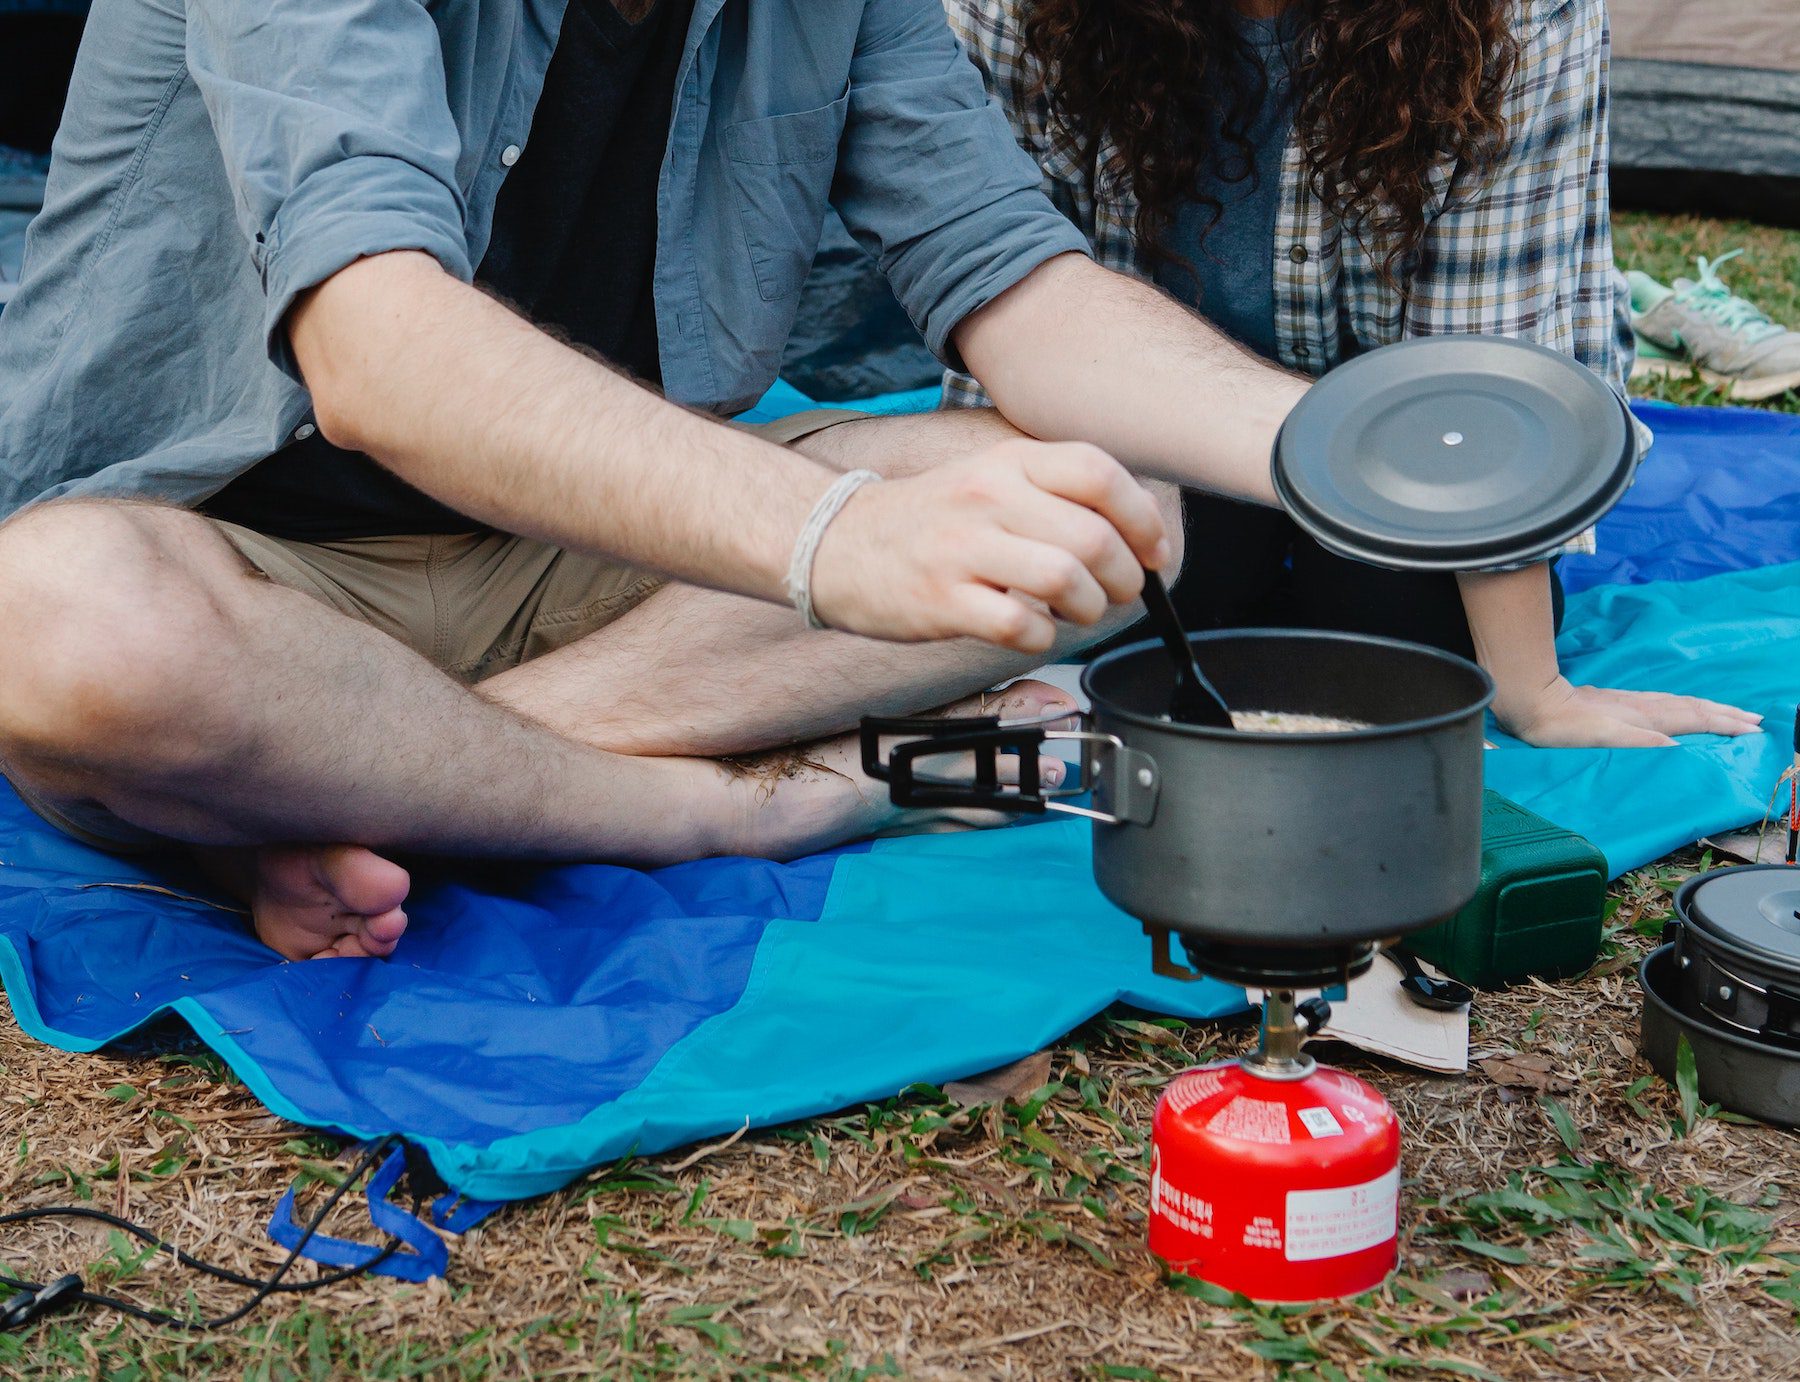 man stirring a meal inside a camping stove while sitting on the grass